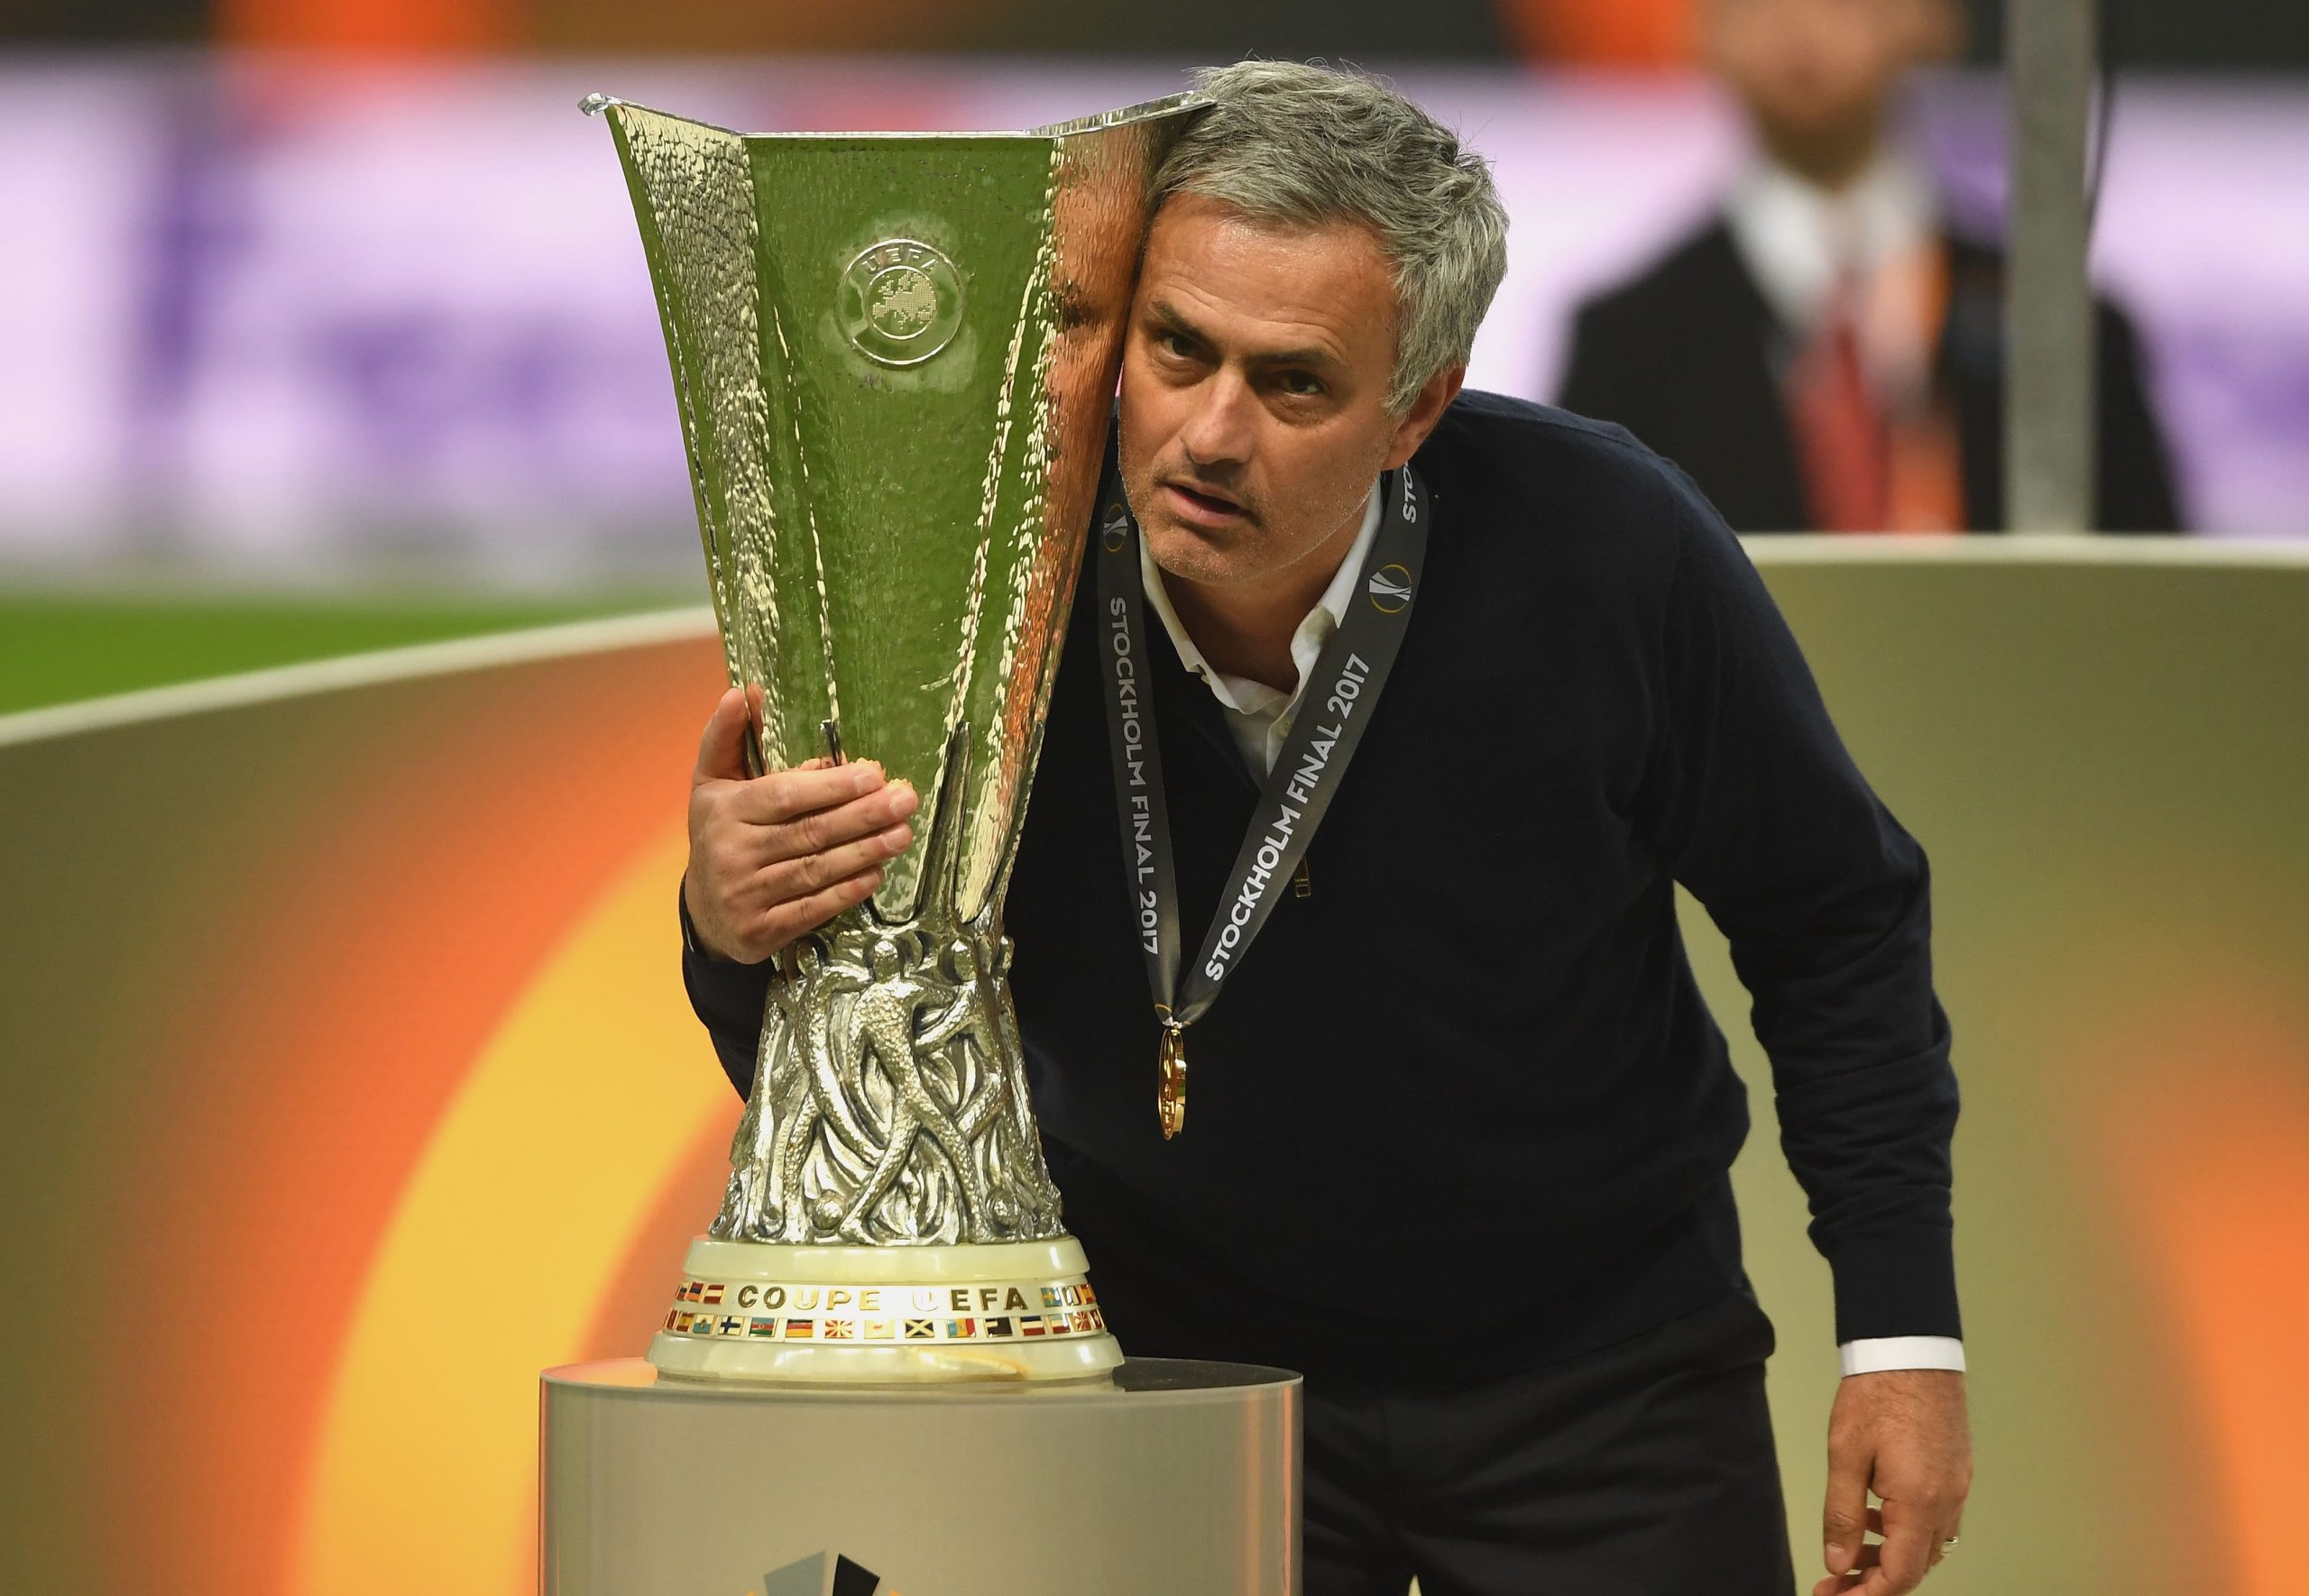 Jose Mourinho won the UEFA Europa League in 2016/17 with Manchester United. (GETTY Images)